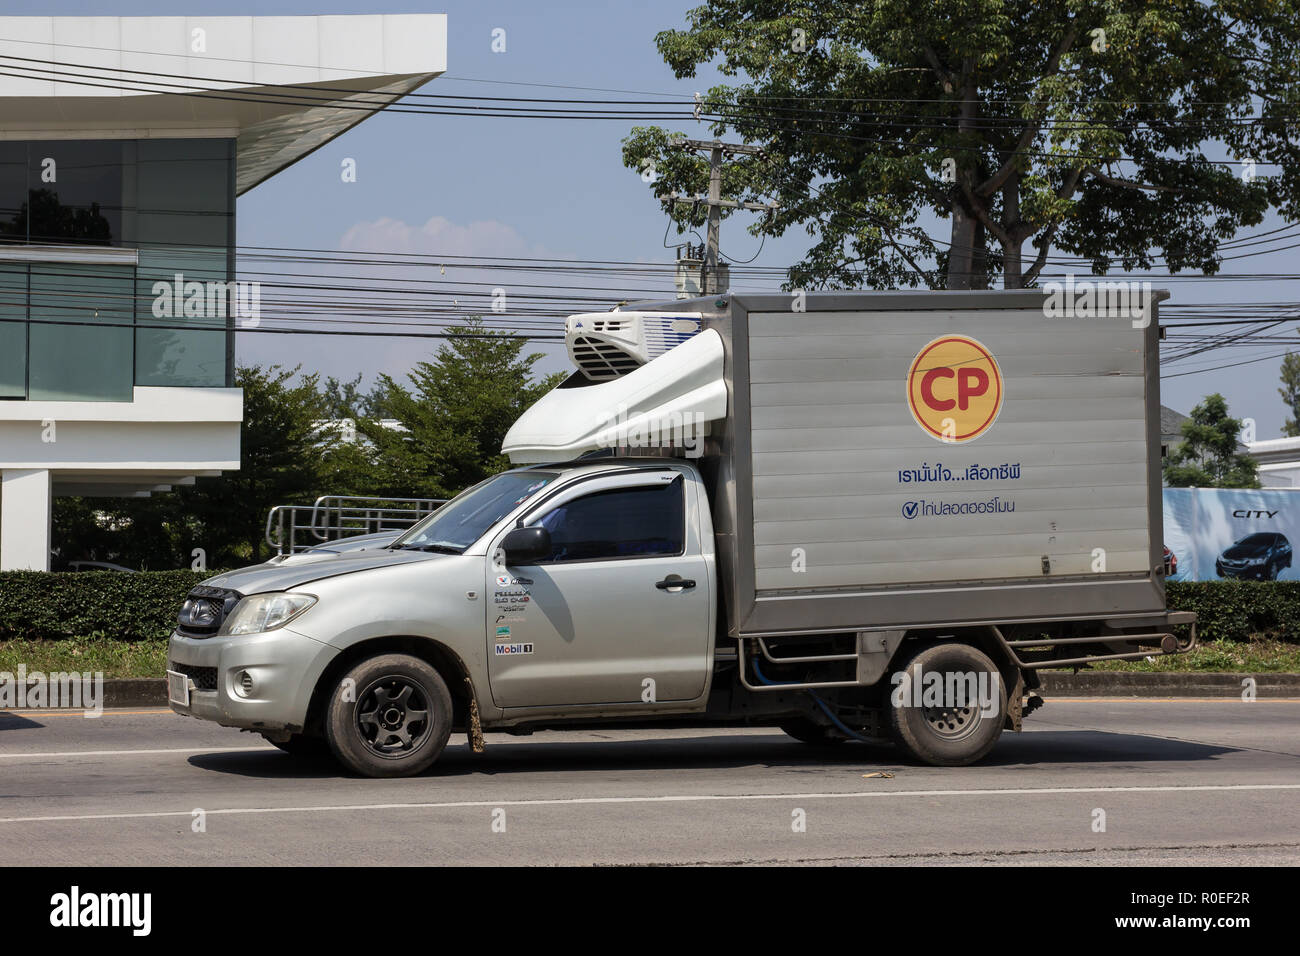 Chiangmai, Thailand - October 5 2018: Refrigerated container Pickup truck  of Cp Company. Photo at road no 1001 about 8 km from downtown Chiangmai,  tha Stock Photo - Alamy